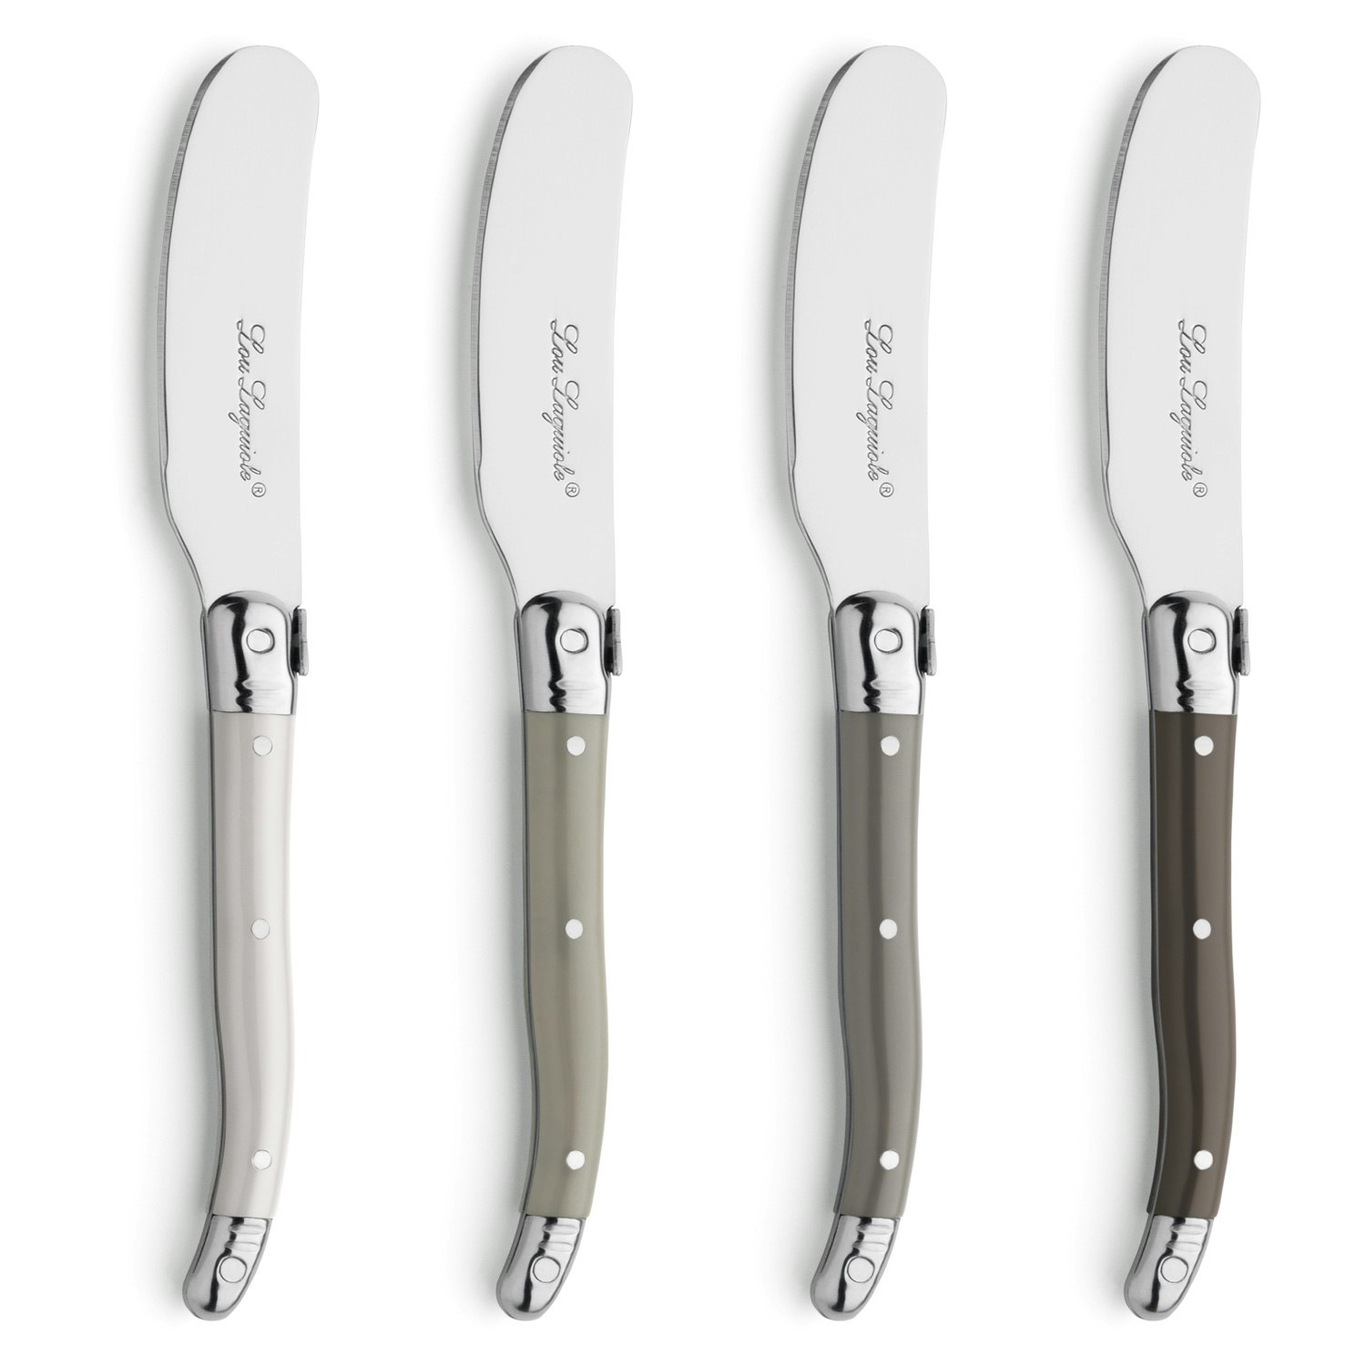 https://royaldesign.com/image/2/lou-laguiole-tradition-butter-knives-4-pack-0?w=800&quality=80